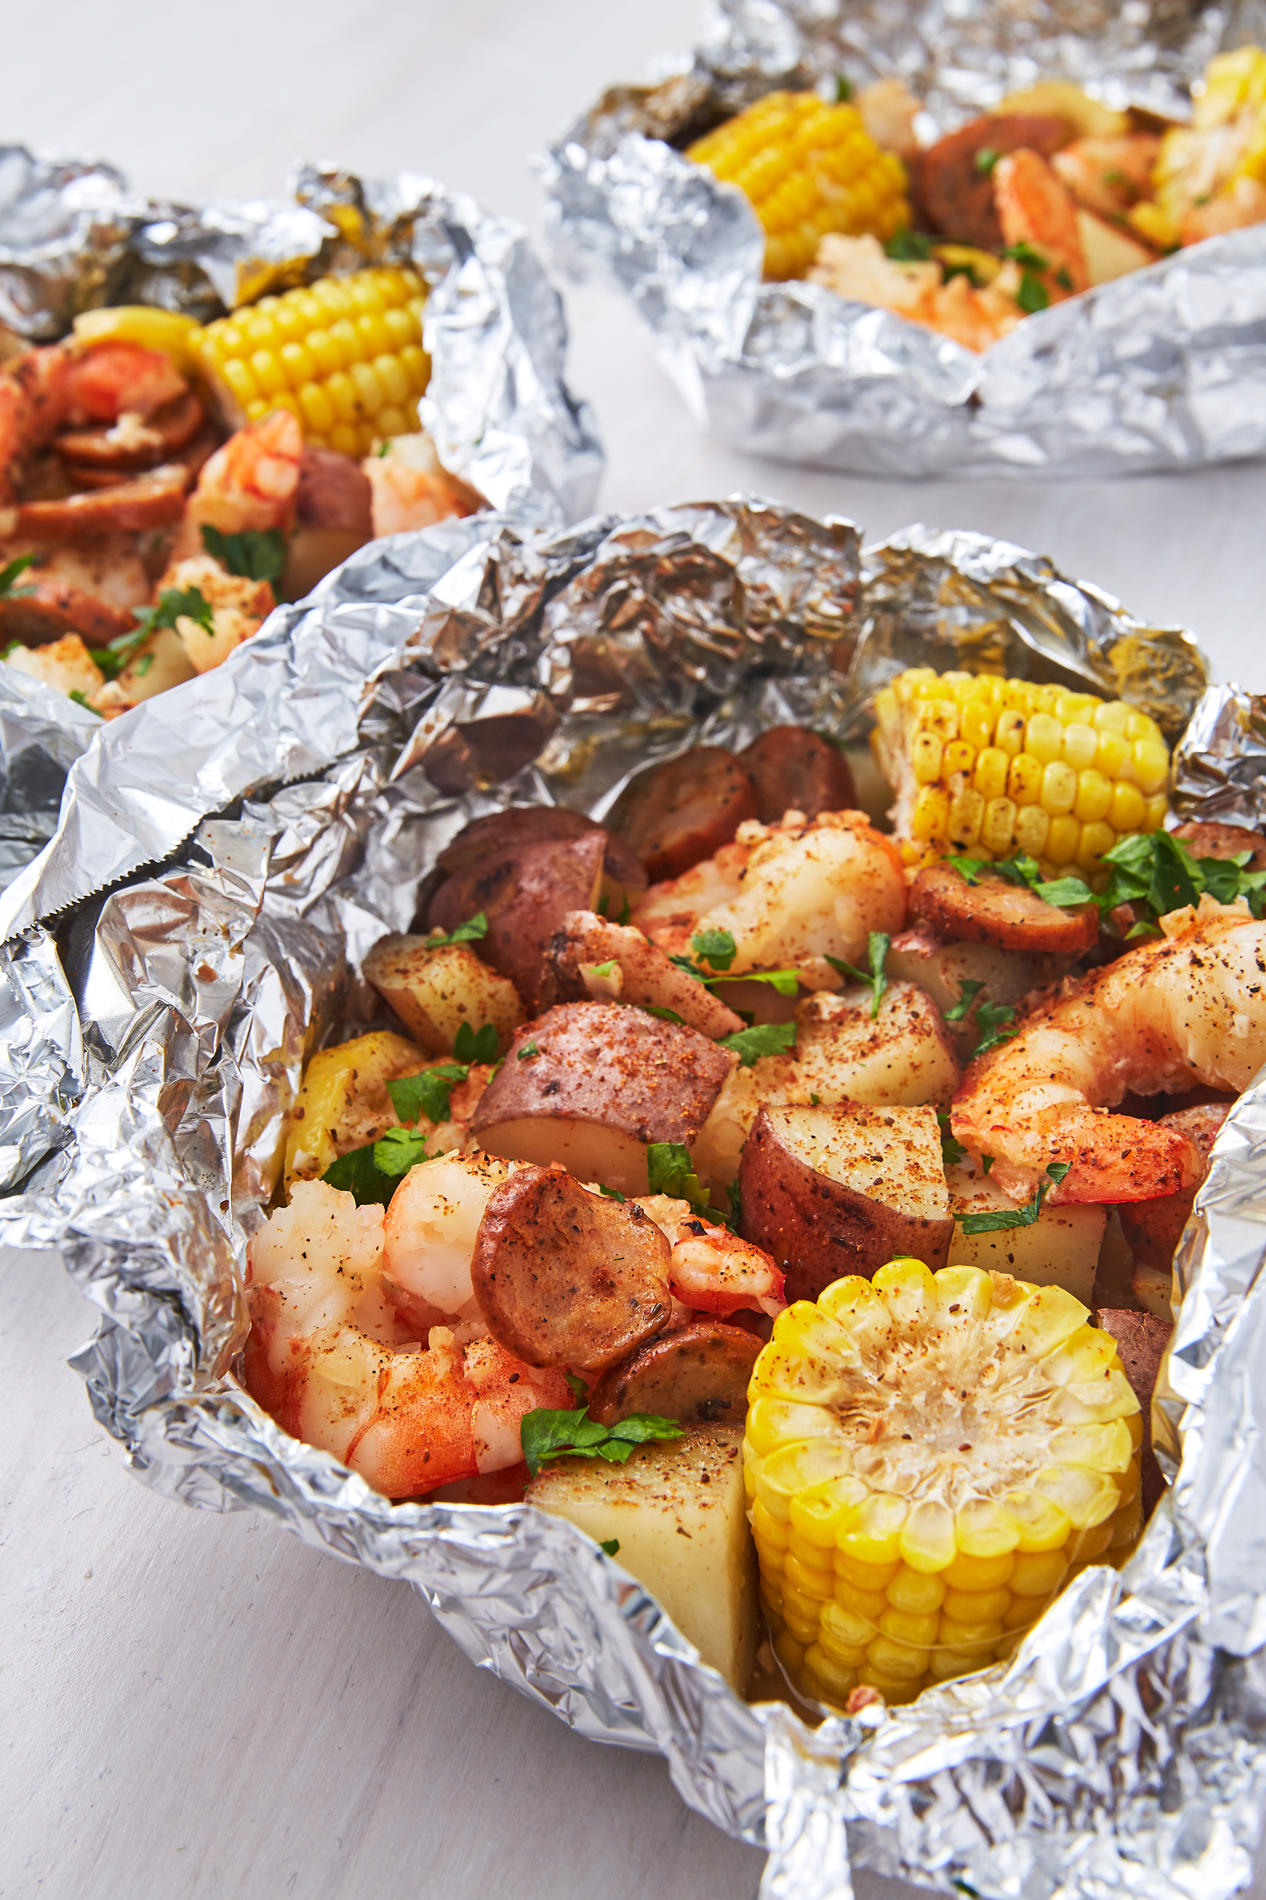 50 Things to Grill in Foil : Food Network, Grilling and Summer How-Tos,  Recipes and Ideas : Food Network